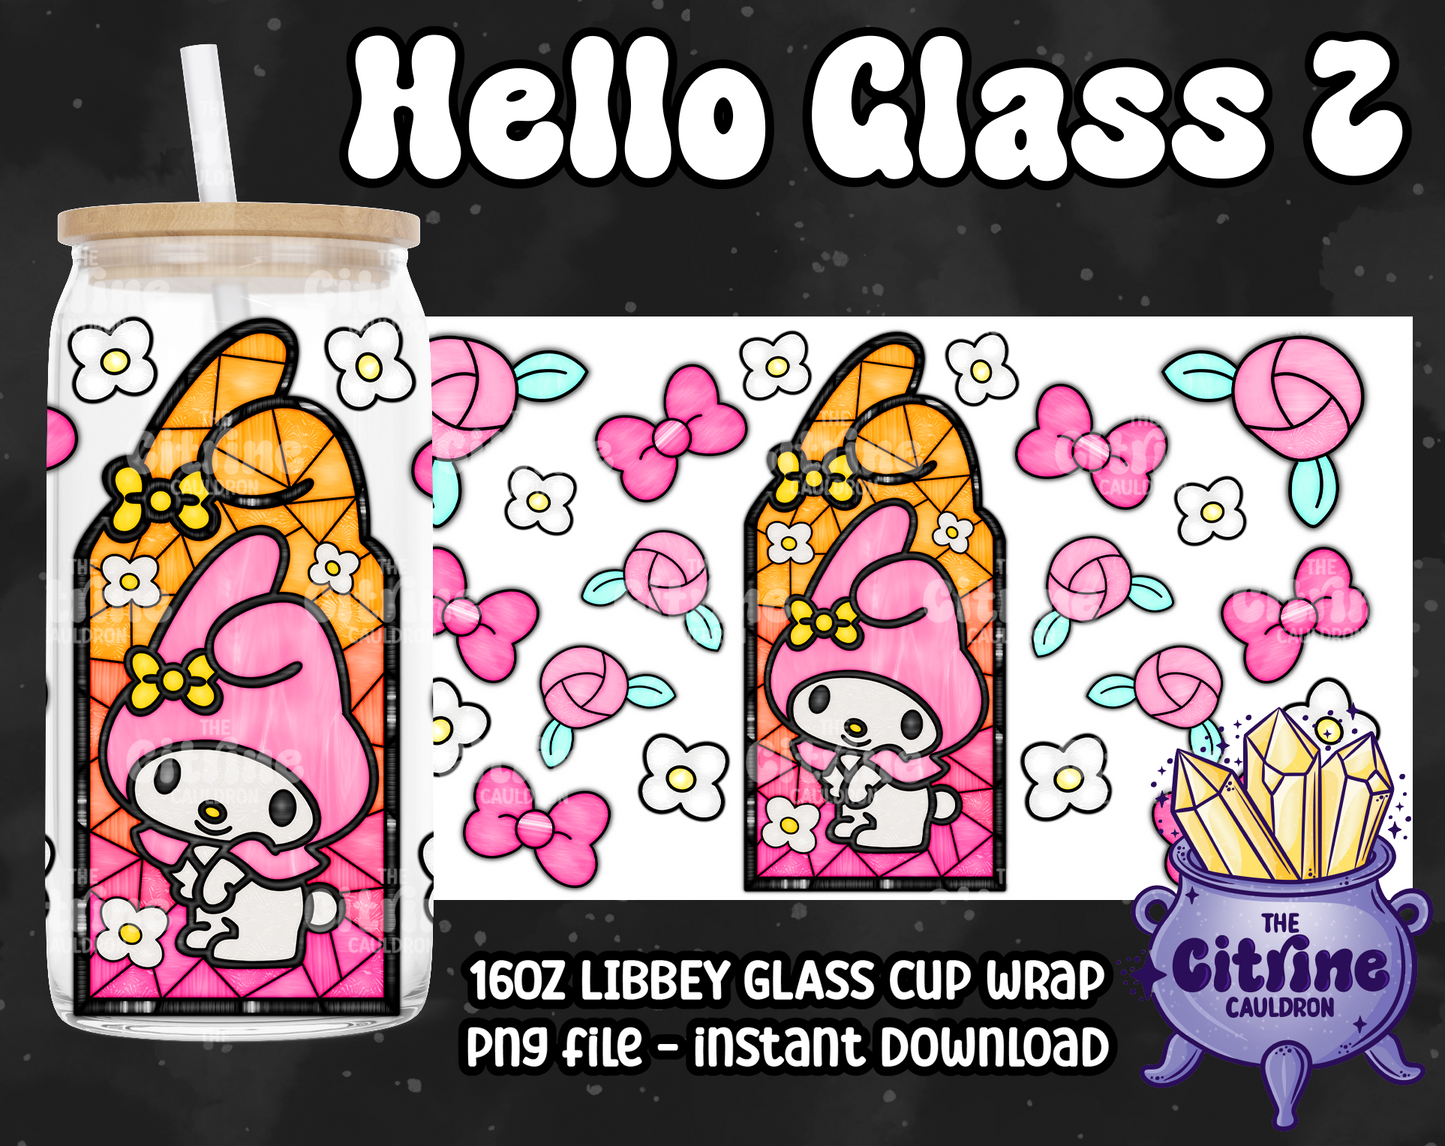 Hello Glass 2 - PNG Wrap for Libbey 16oz Glass Can